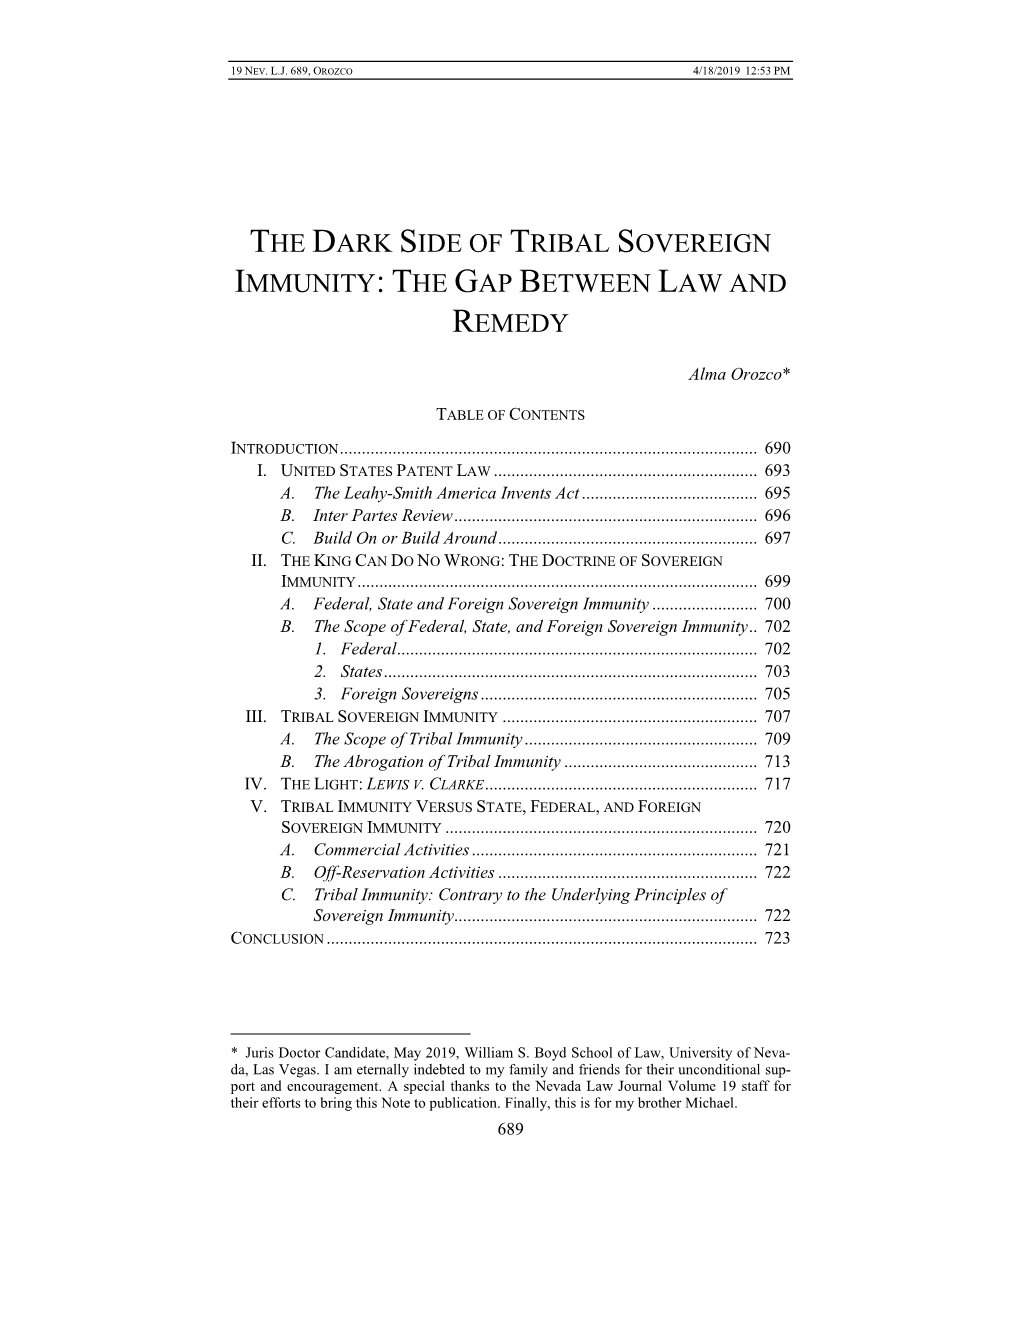 The Dark Side of Tribal Sovereign Immunity: the Gap Between Law and Remedy